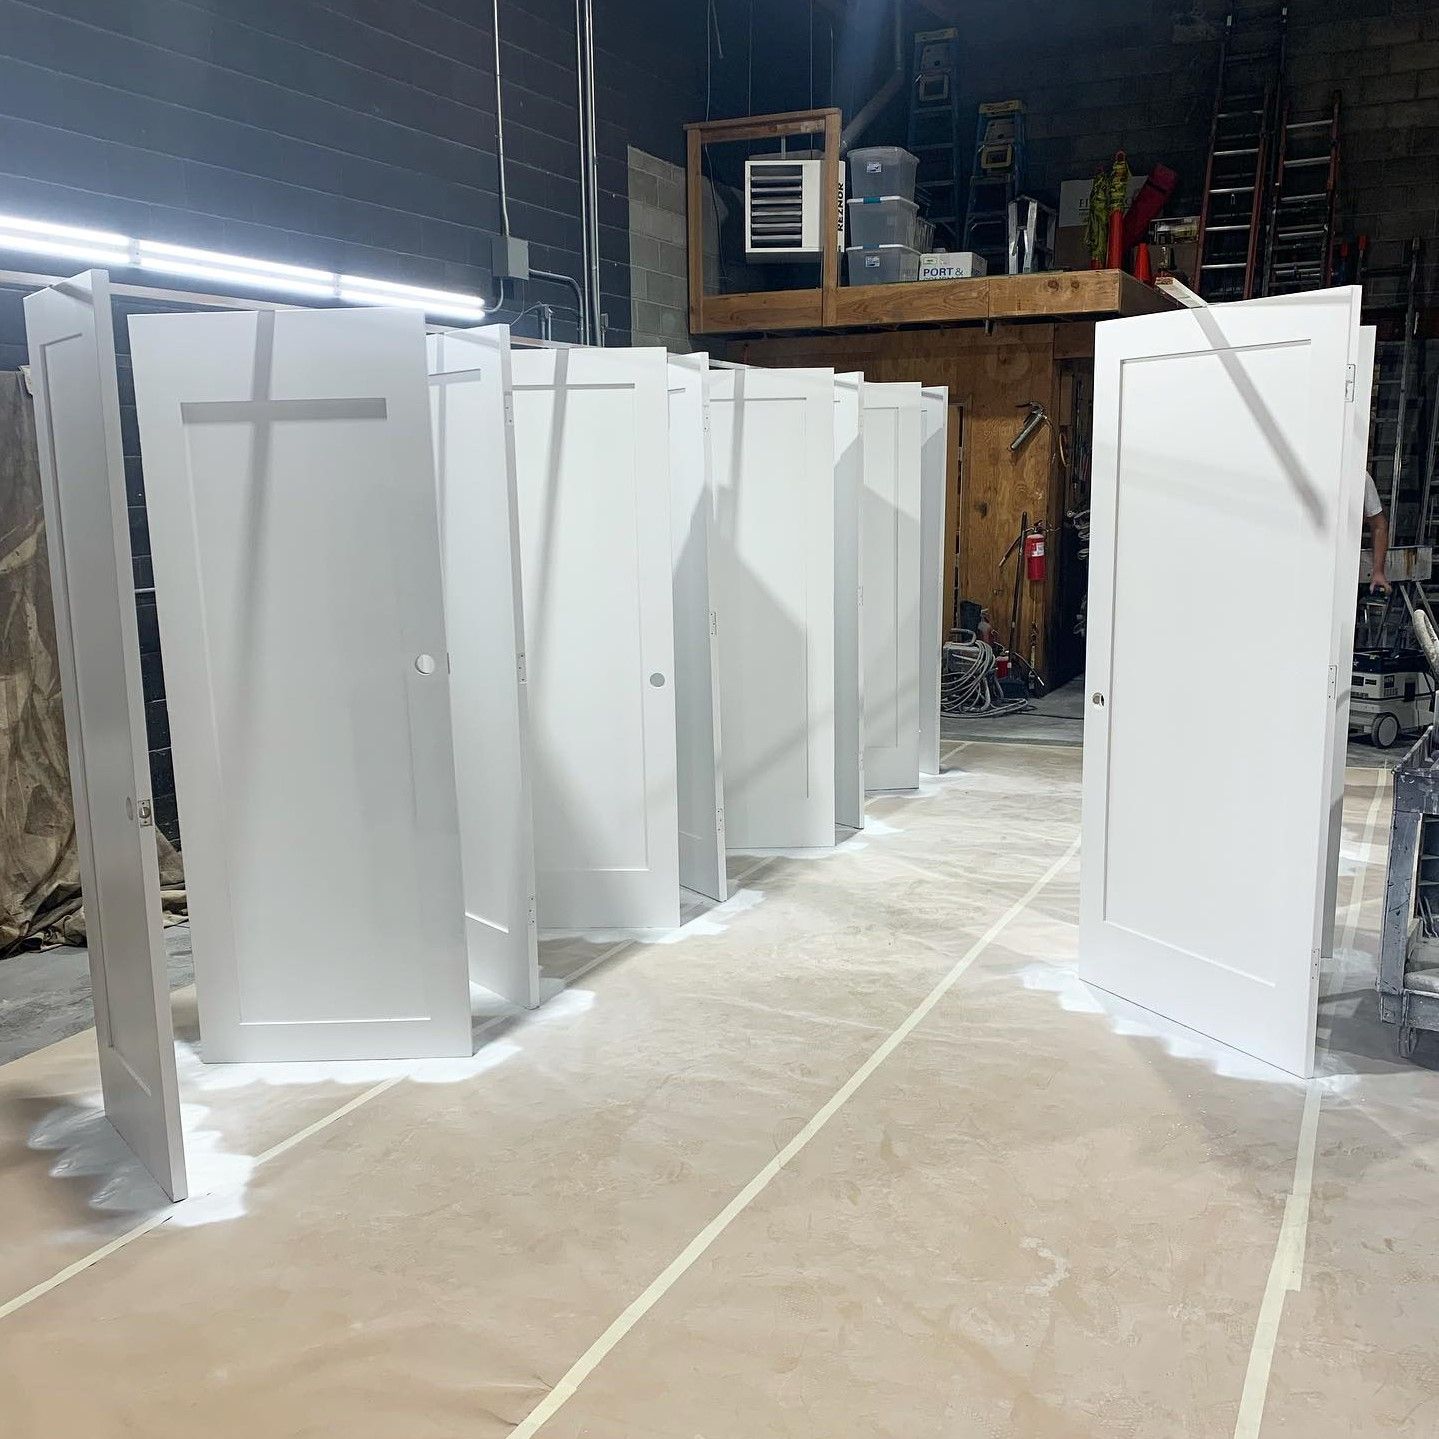 Freshly painted white doors lined up in a workshop.